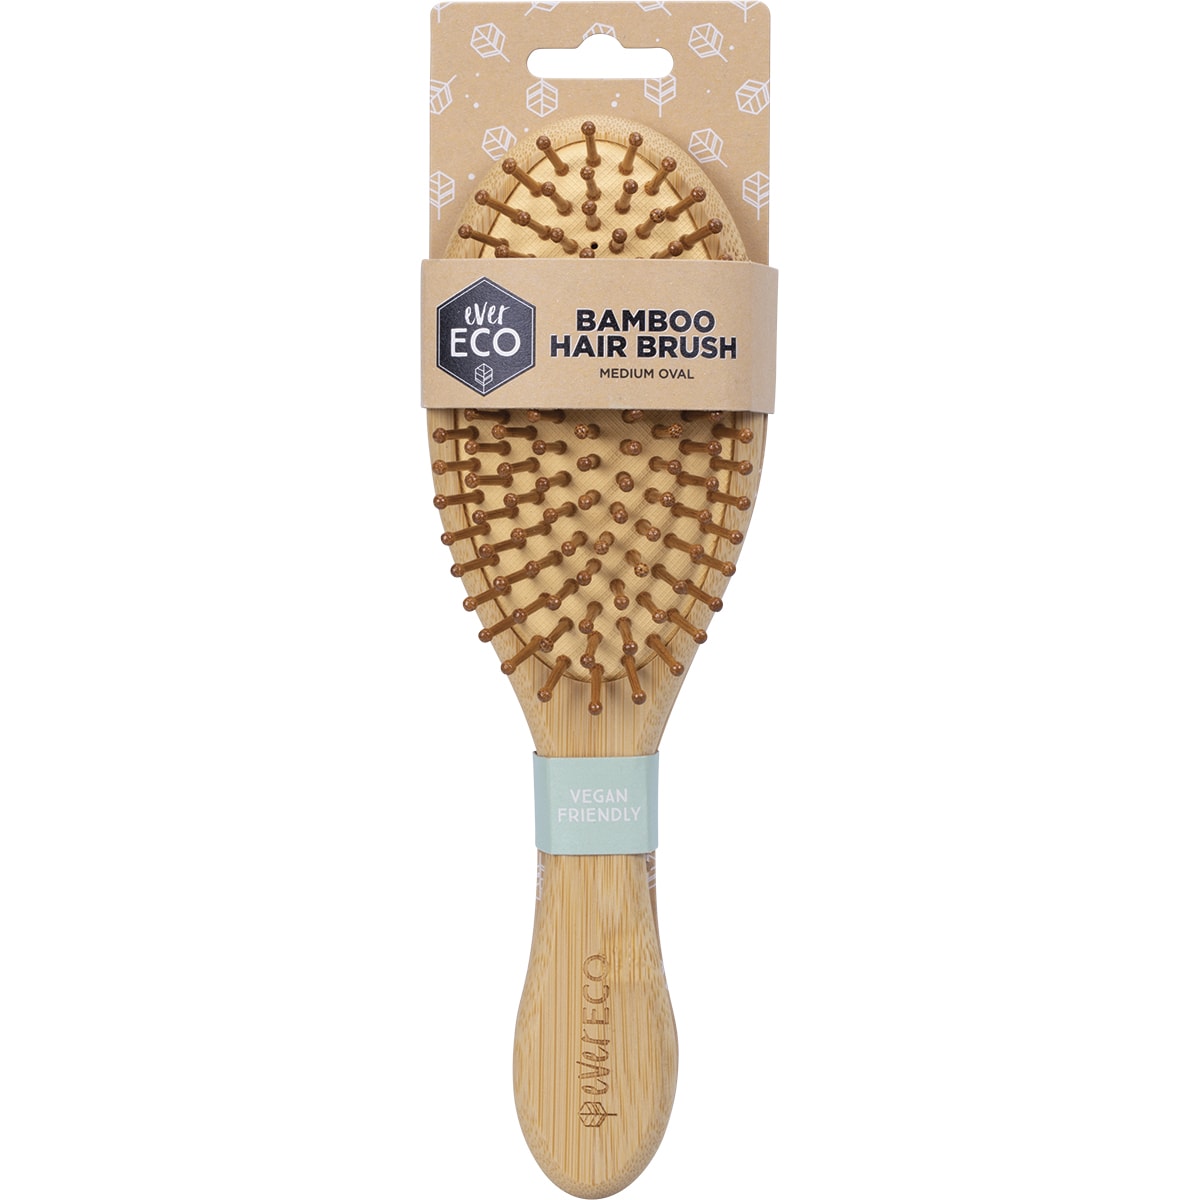 Ever Eco medium oval bamboo hairbrush in packaging